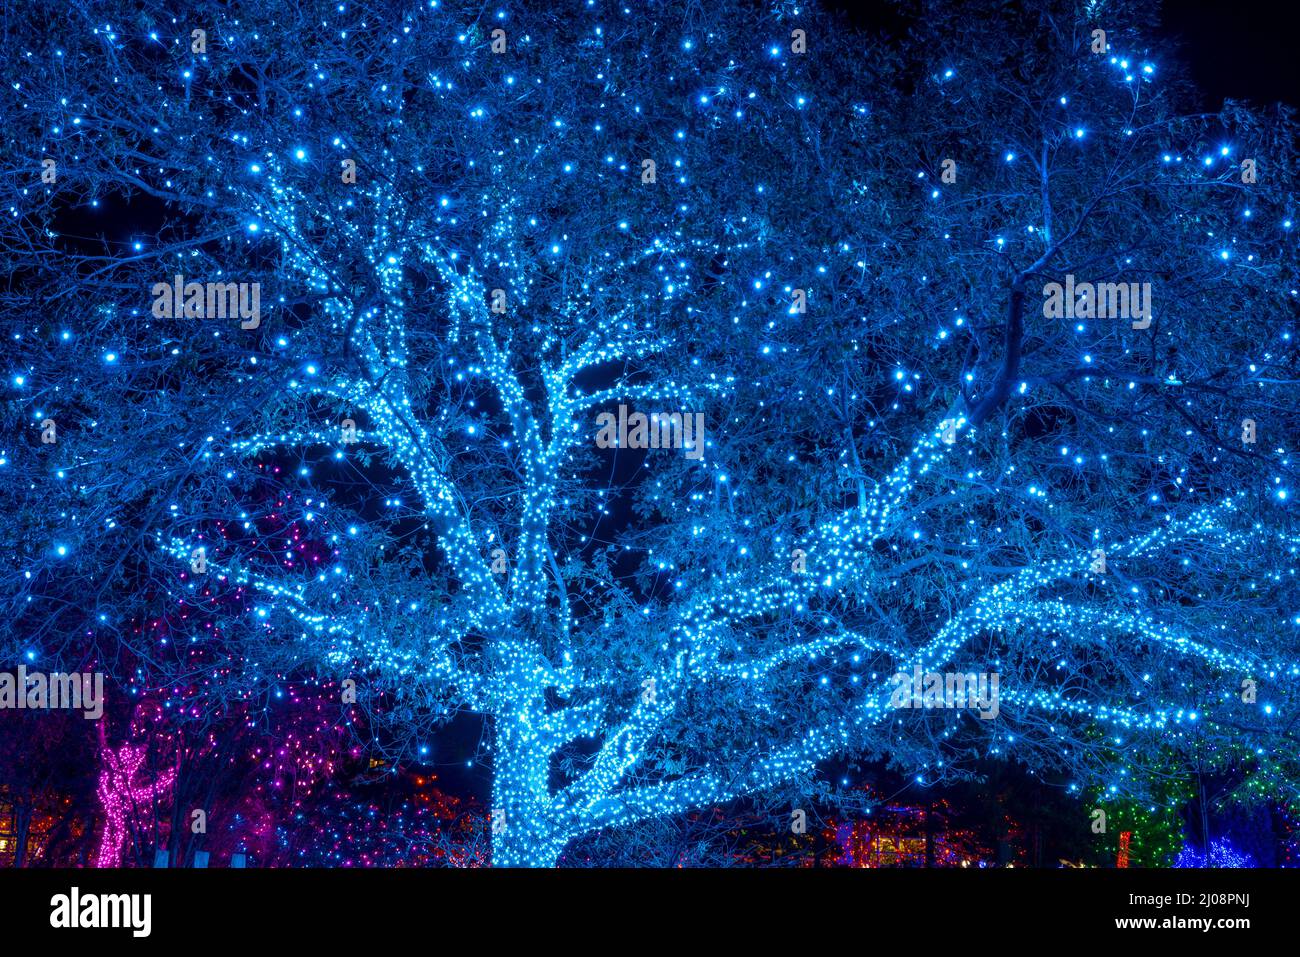 Tree of Lights - Night view of a giant tree lit with countless white LED lights at Denver Botanic Gardens during its holiday Blossoms of Light event. Stock Photo